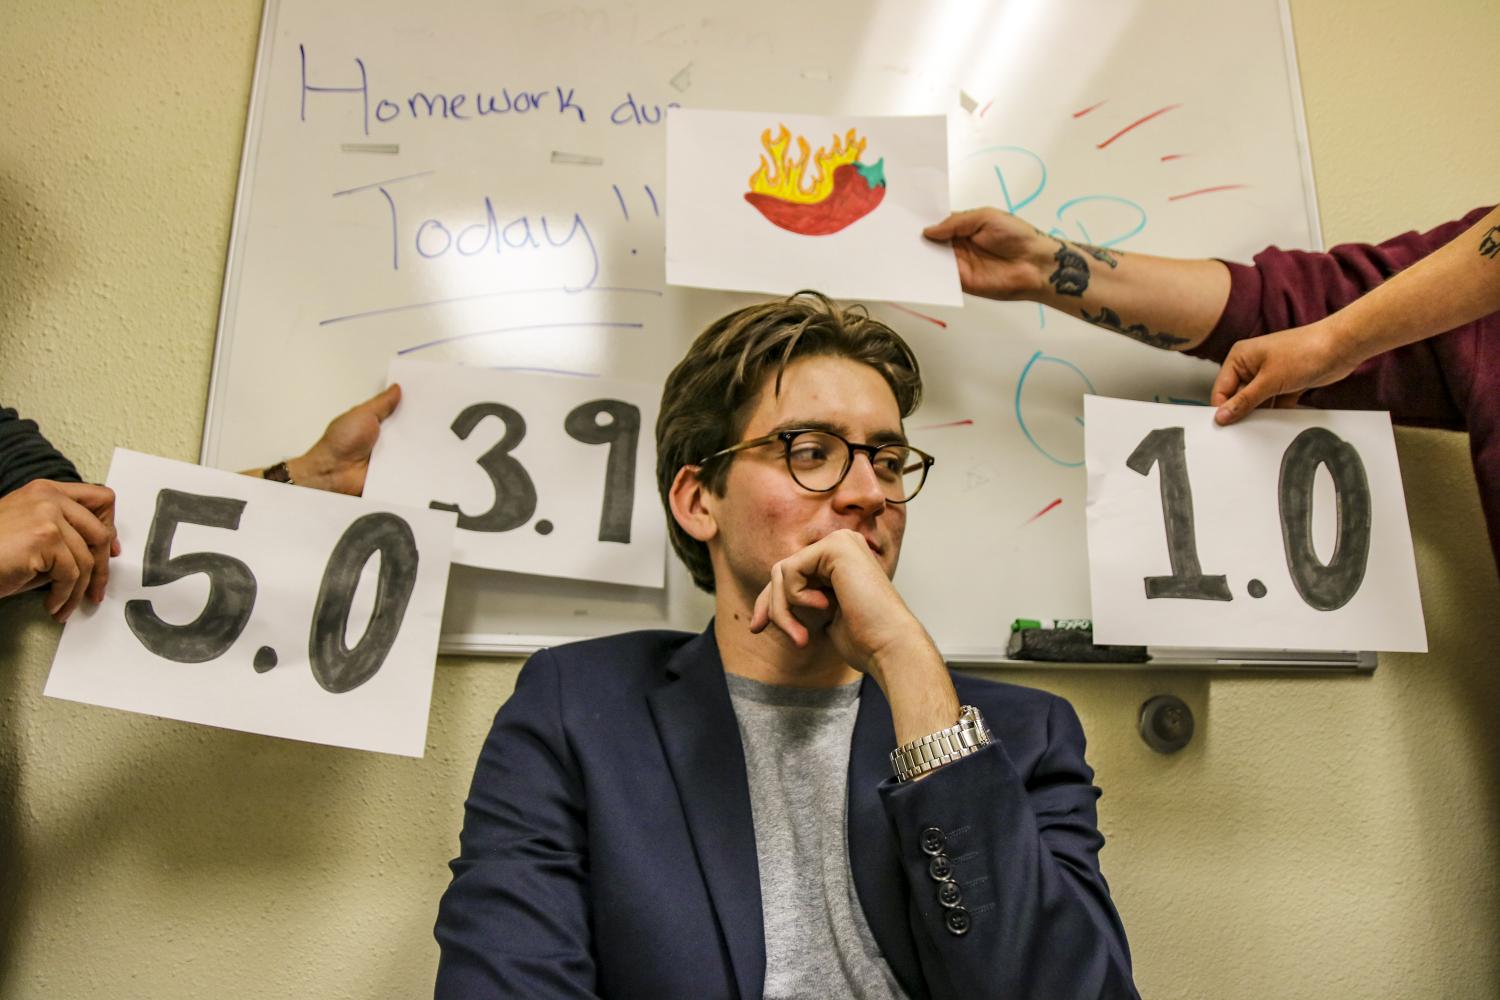 American River College professors discuss their feelings on ratemyprofessors.com in the 2019 fall semester.
(Photo by Ashley Hayes-Stone)